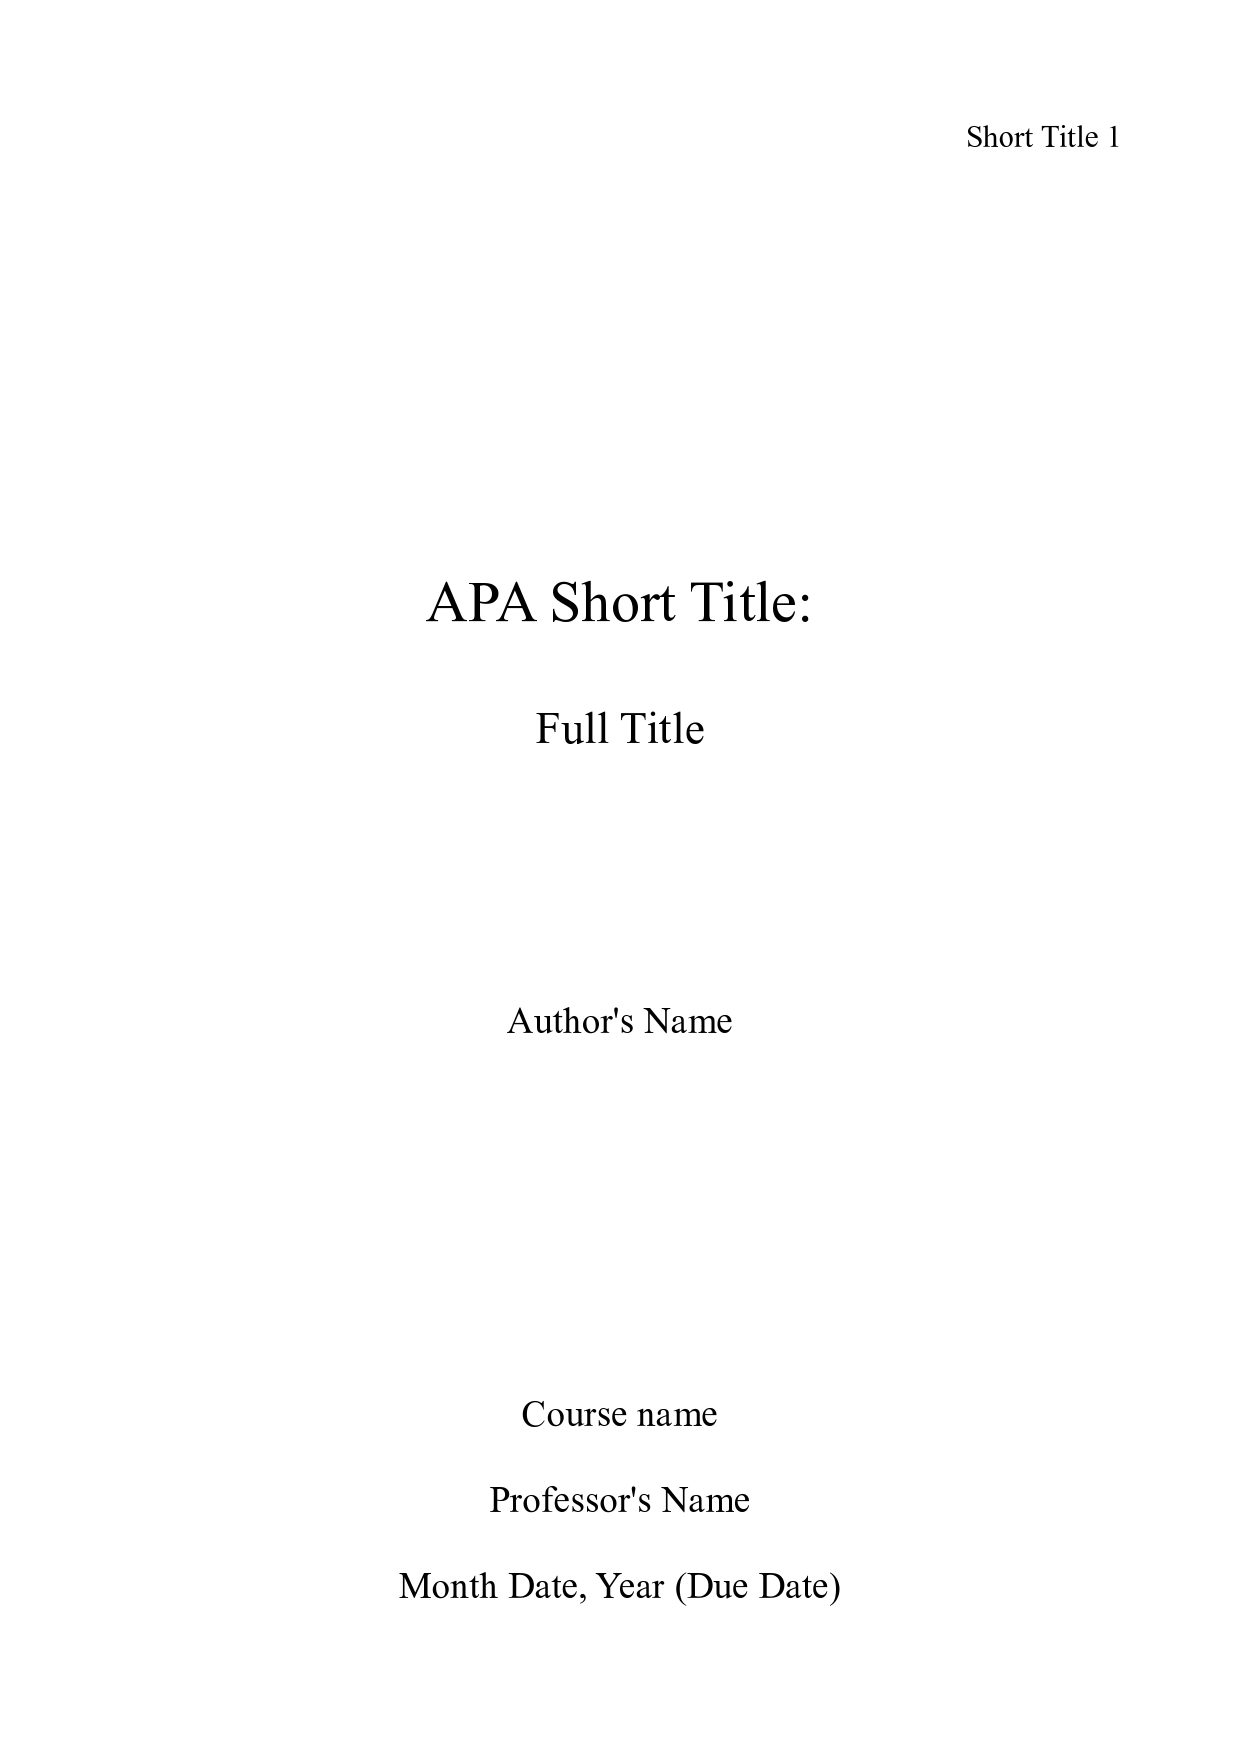 Apa style sample cover page or title page for term paper